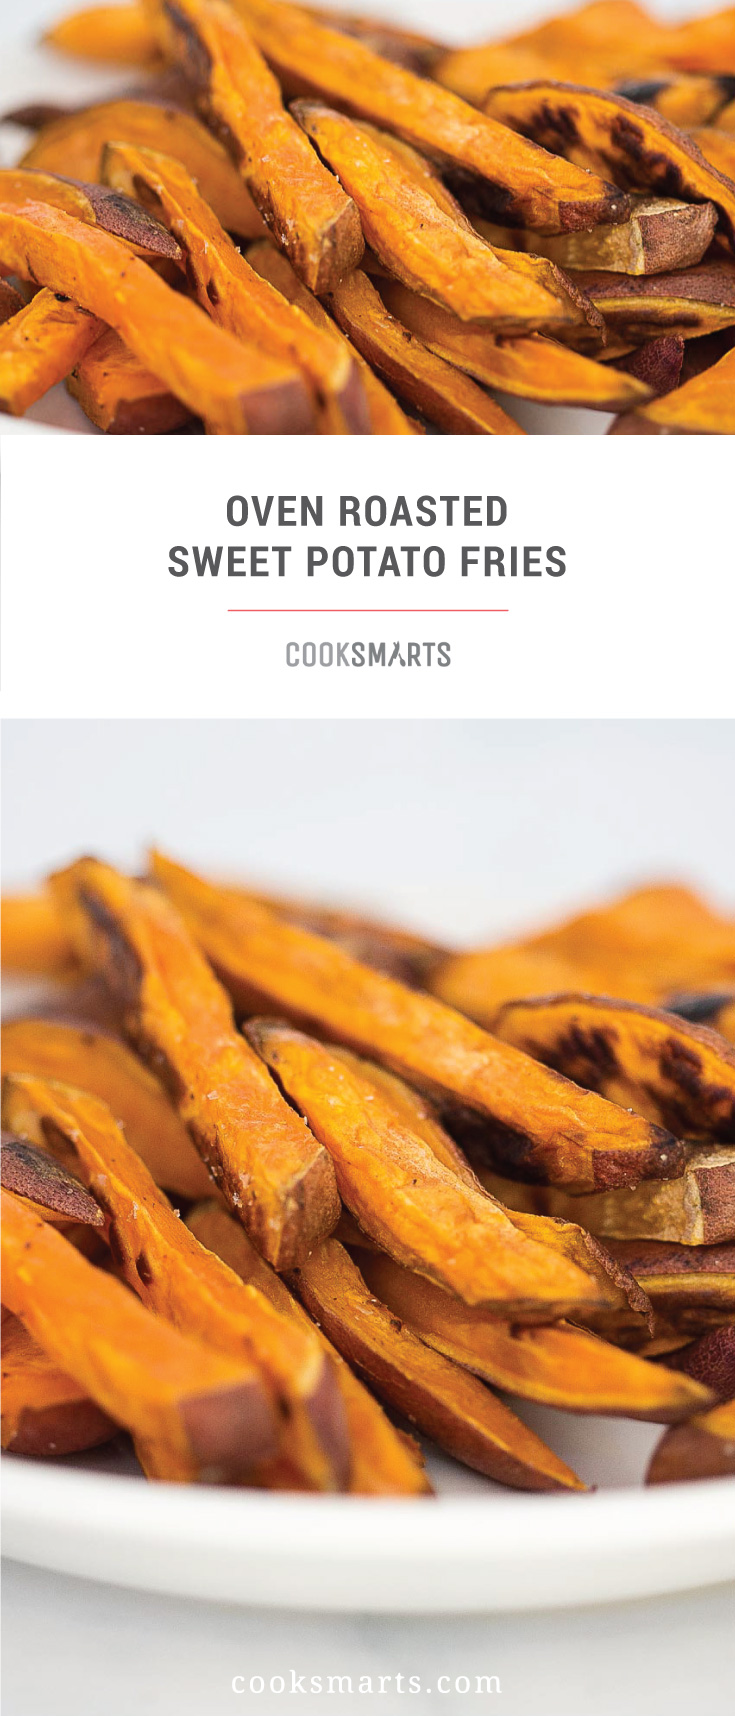 Easy Side Dish Recipe: Oven Roasted Sweet Potato Fries | Cook Smarts